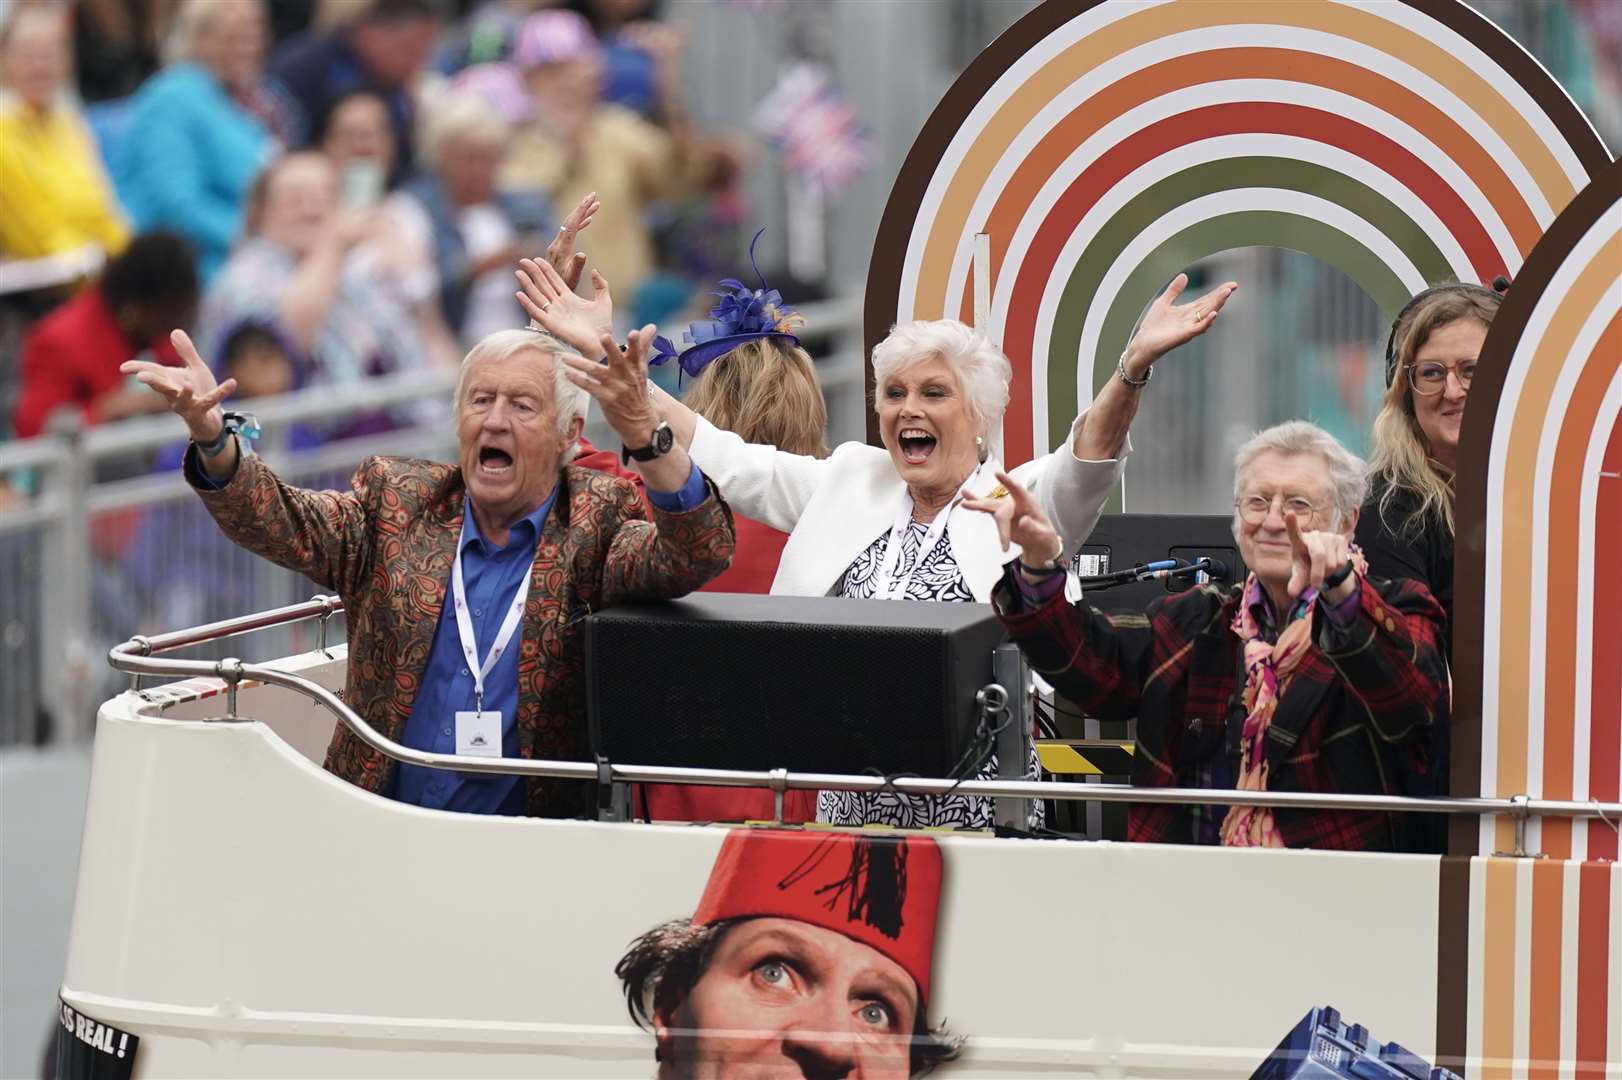 Chris Tarrant, Angela Rippon and Noddy Holder (Aaron Chown/PA)